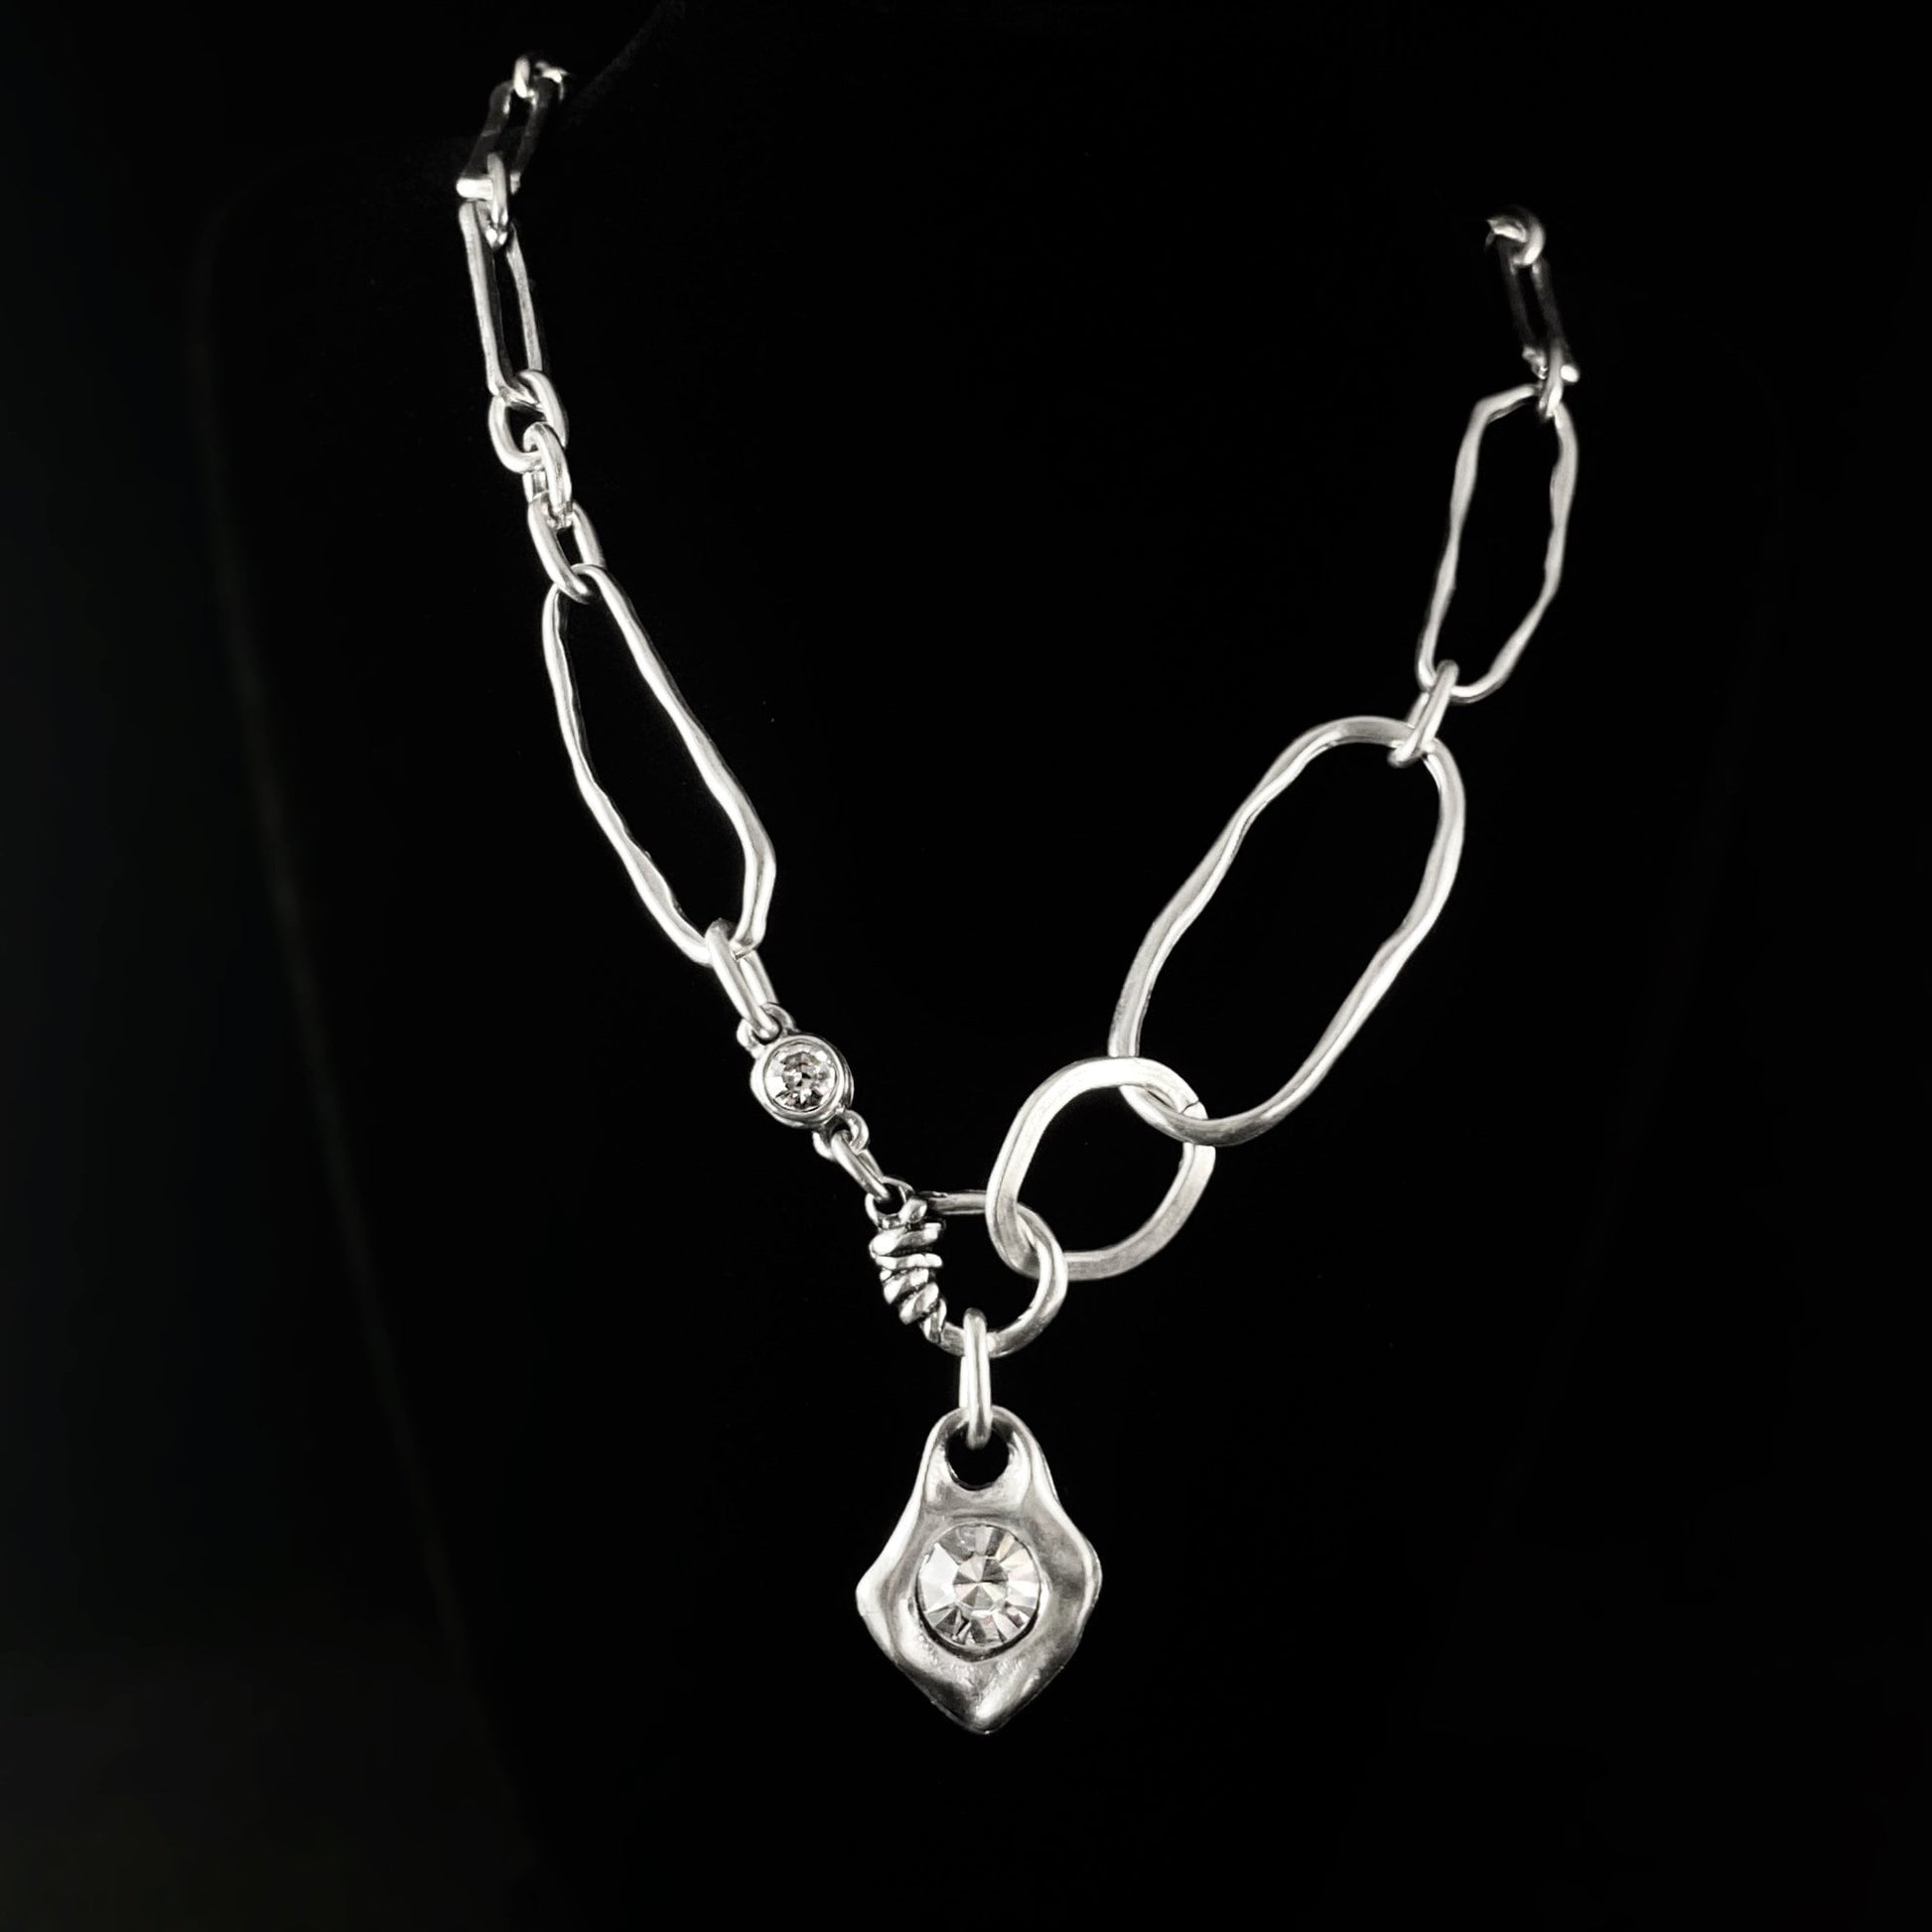 Silver Chain Link Abstract Necklace With Crystal Pendant and Crystal Accent, Handmade, Nickel Free-Noir